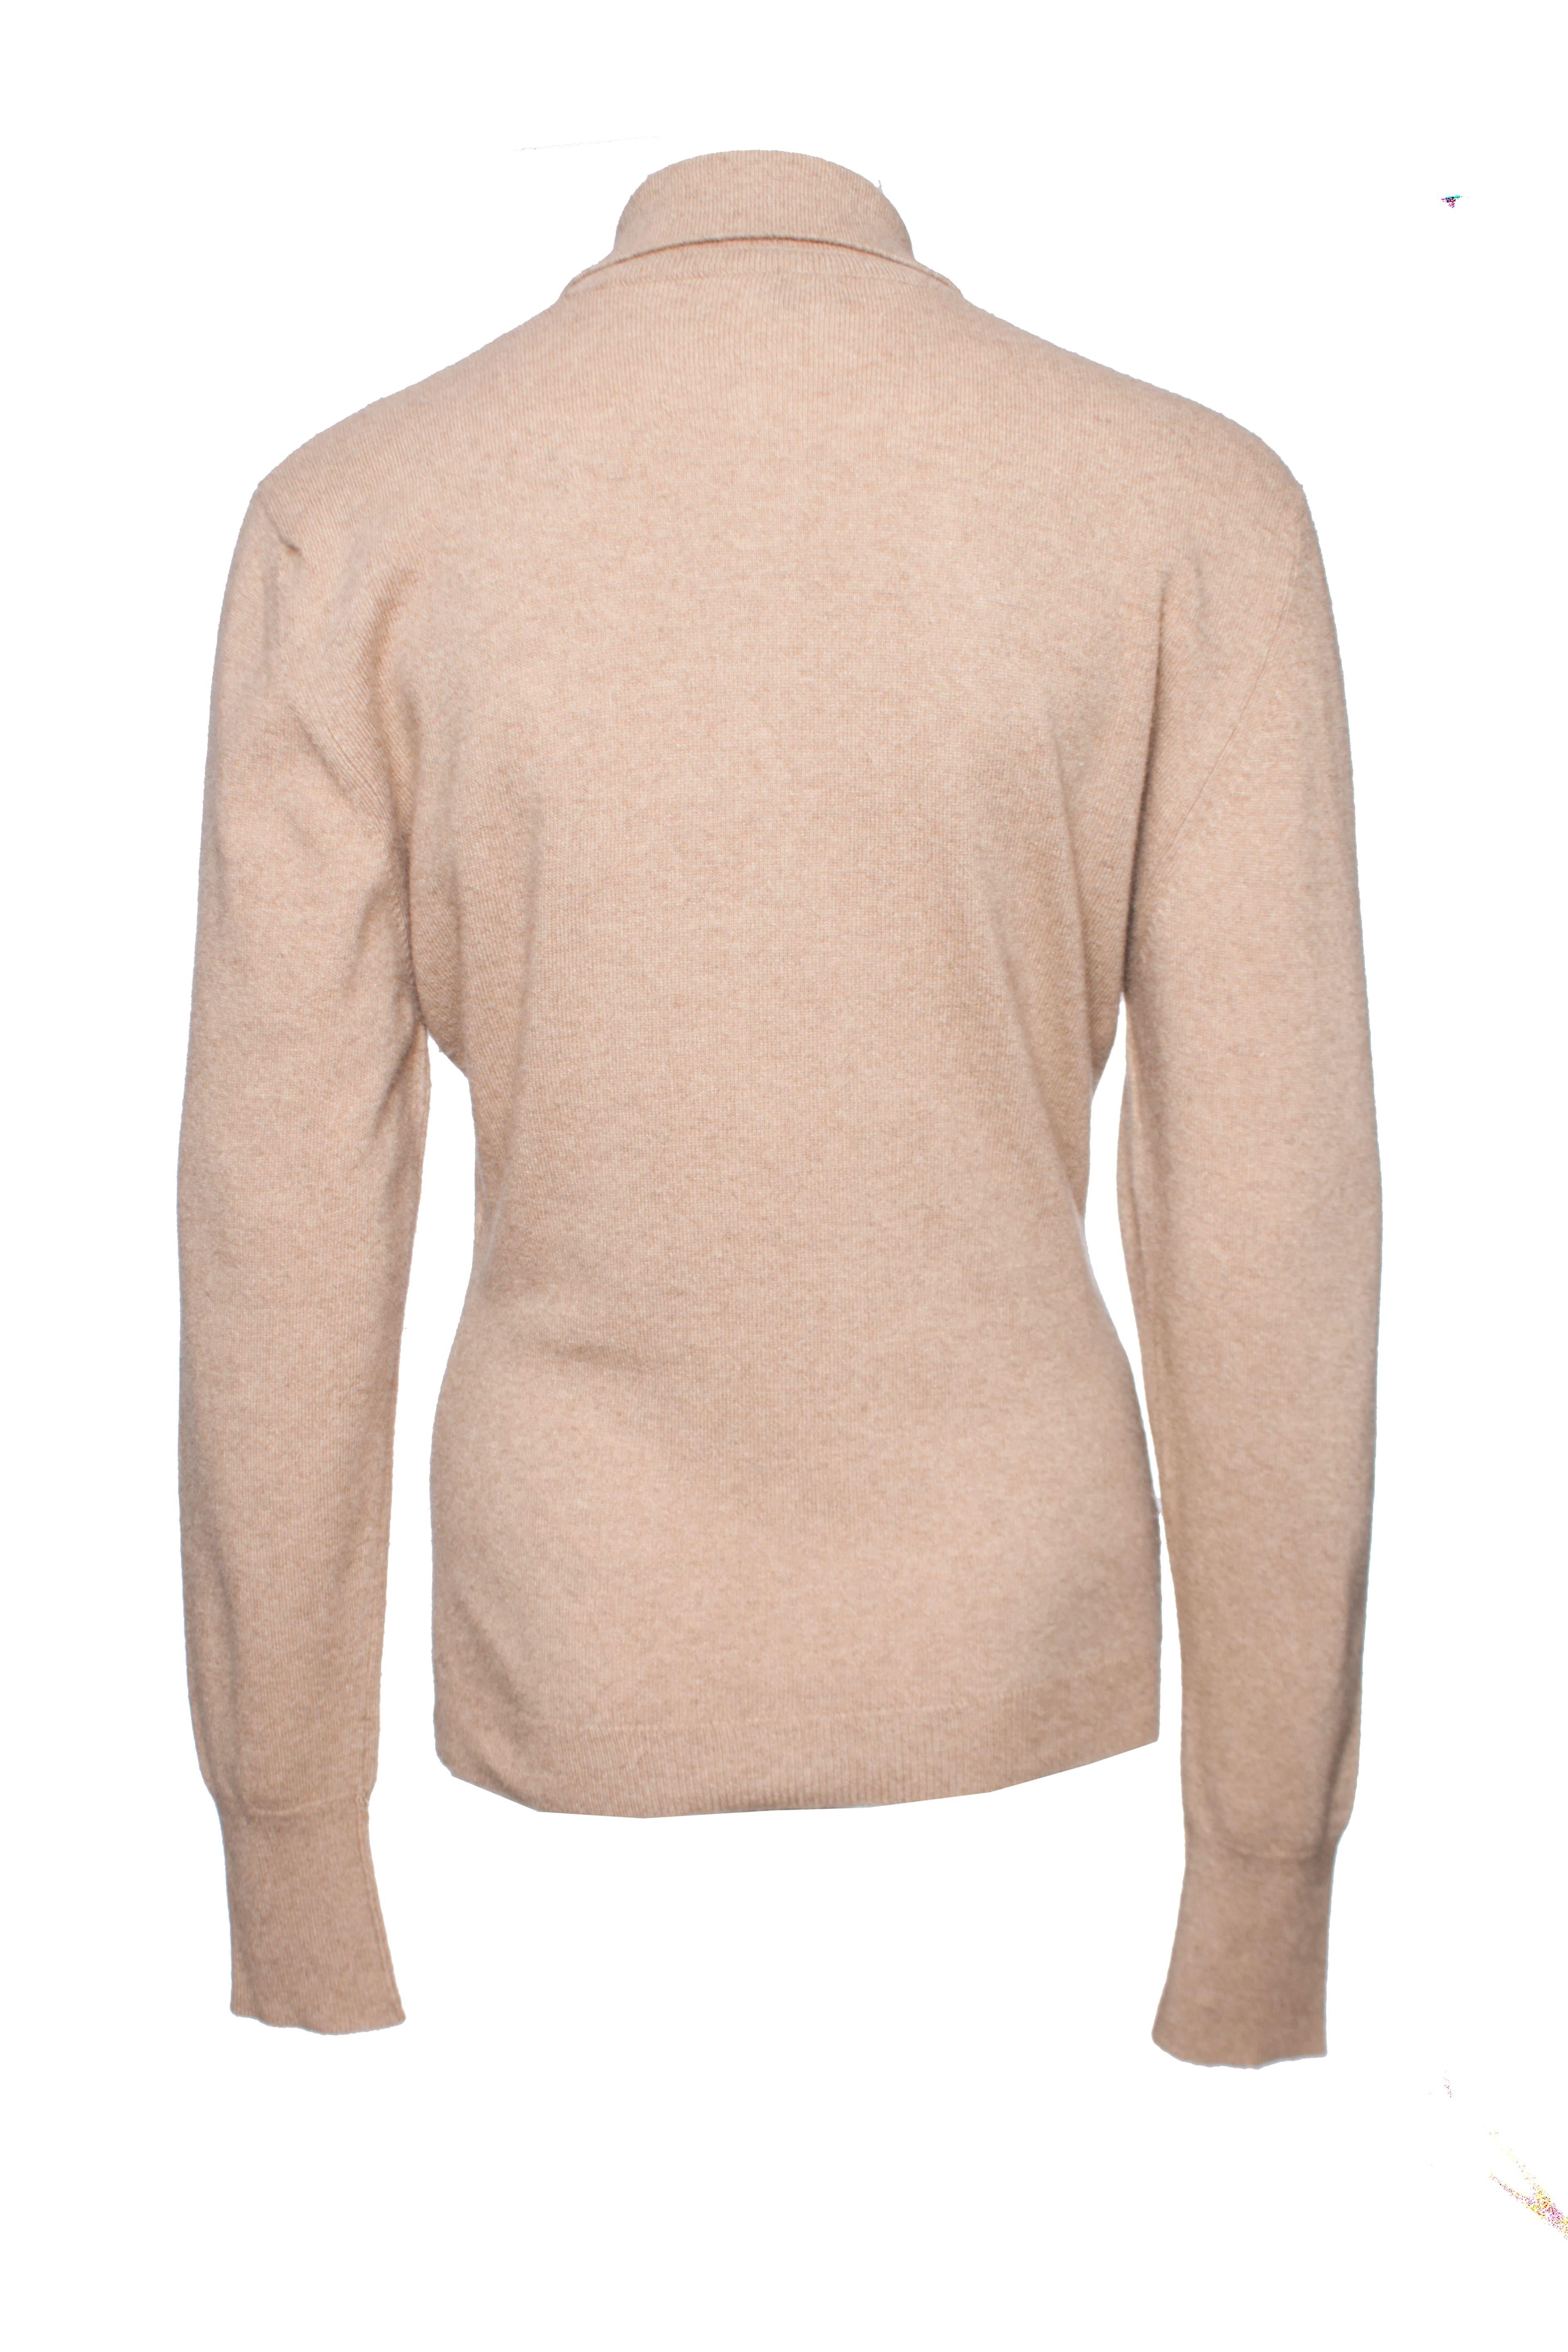 Chanel, camel cashmere cardigan. In Excellent Condition For Sale In AMSTERDAM, NL